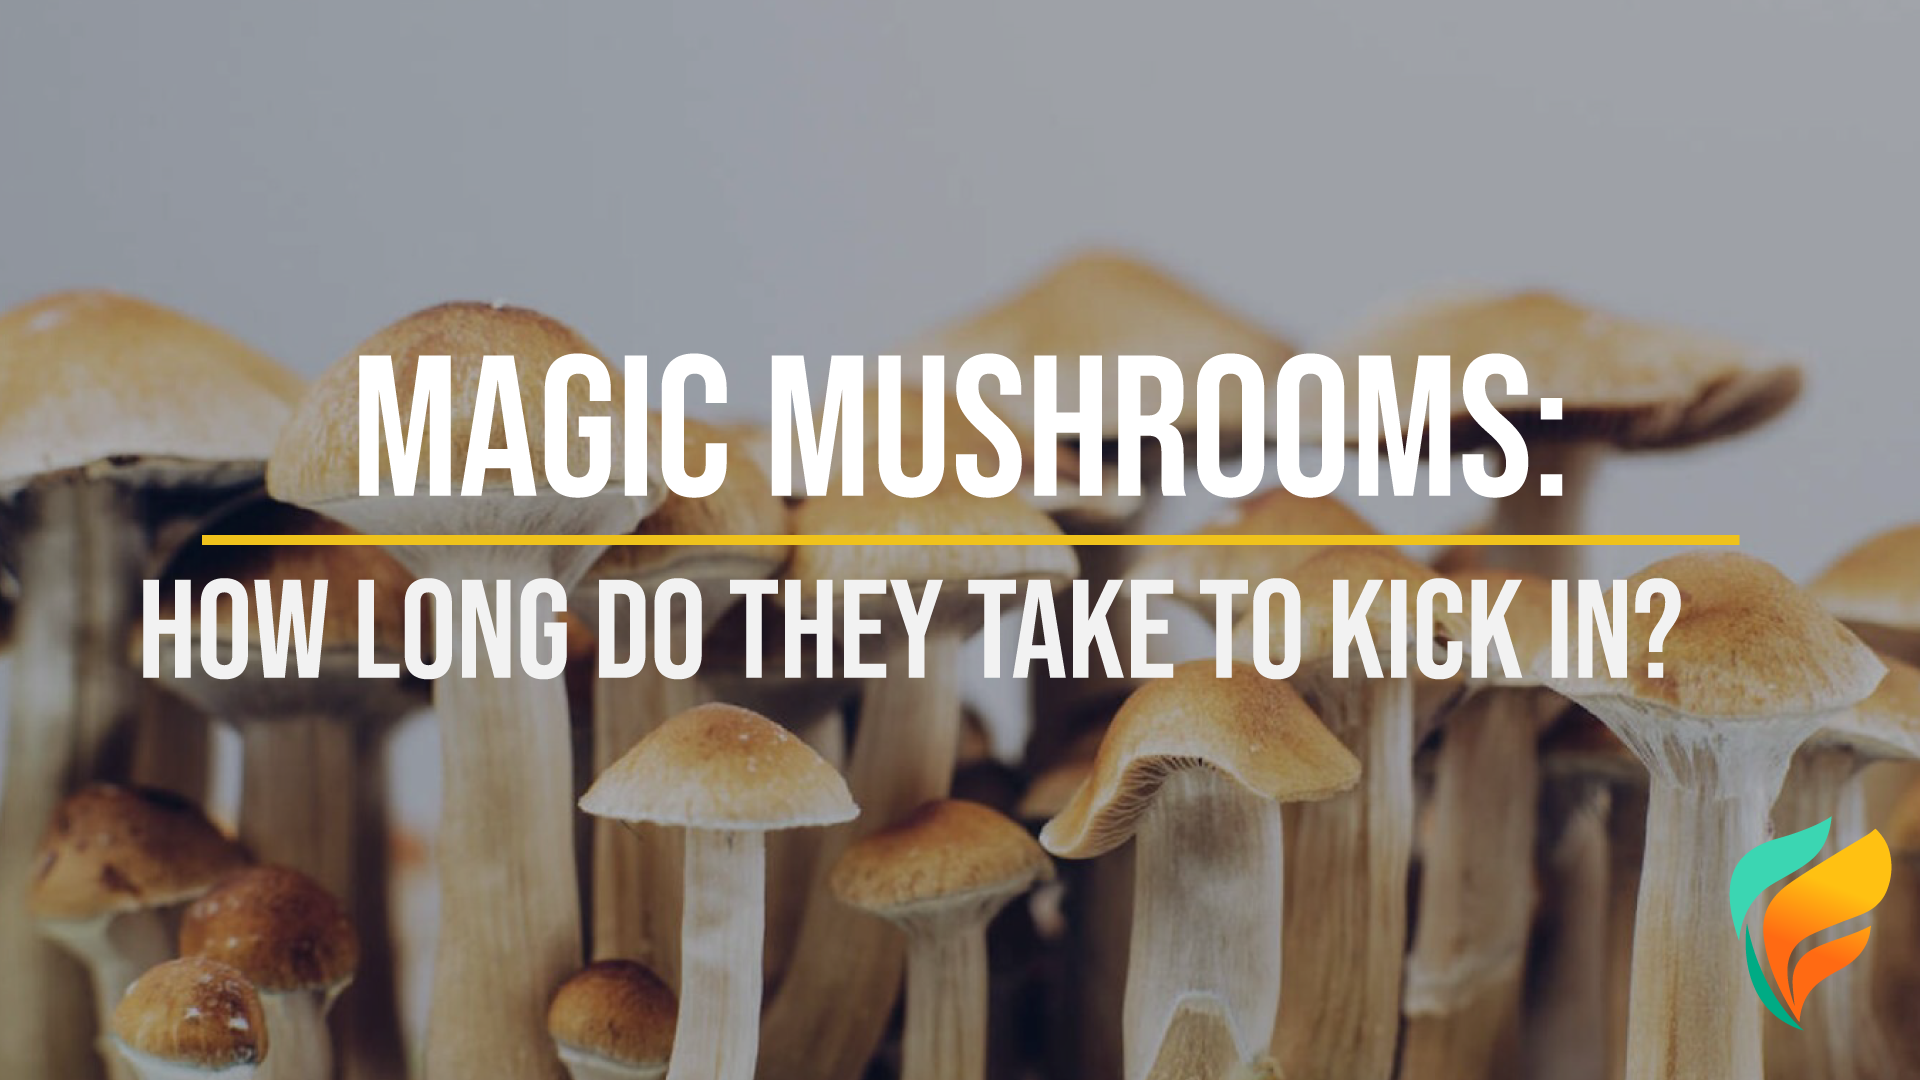 How Long Does It Take For Magic Mushrooms To Kick In?